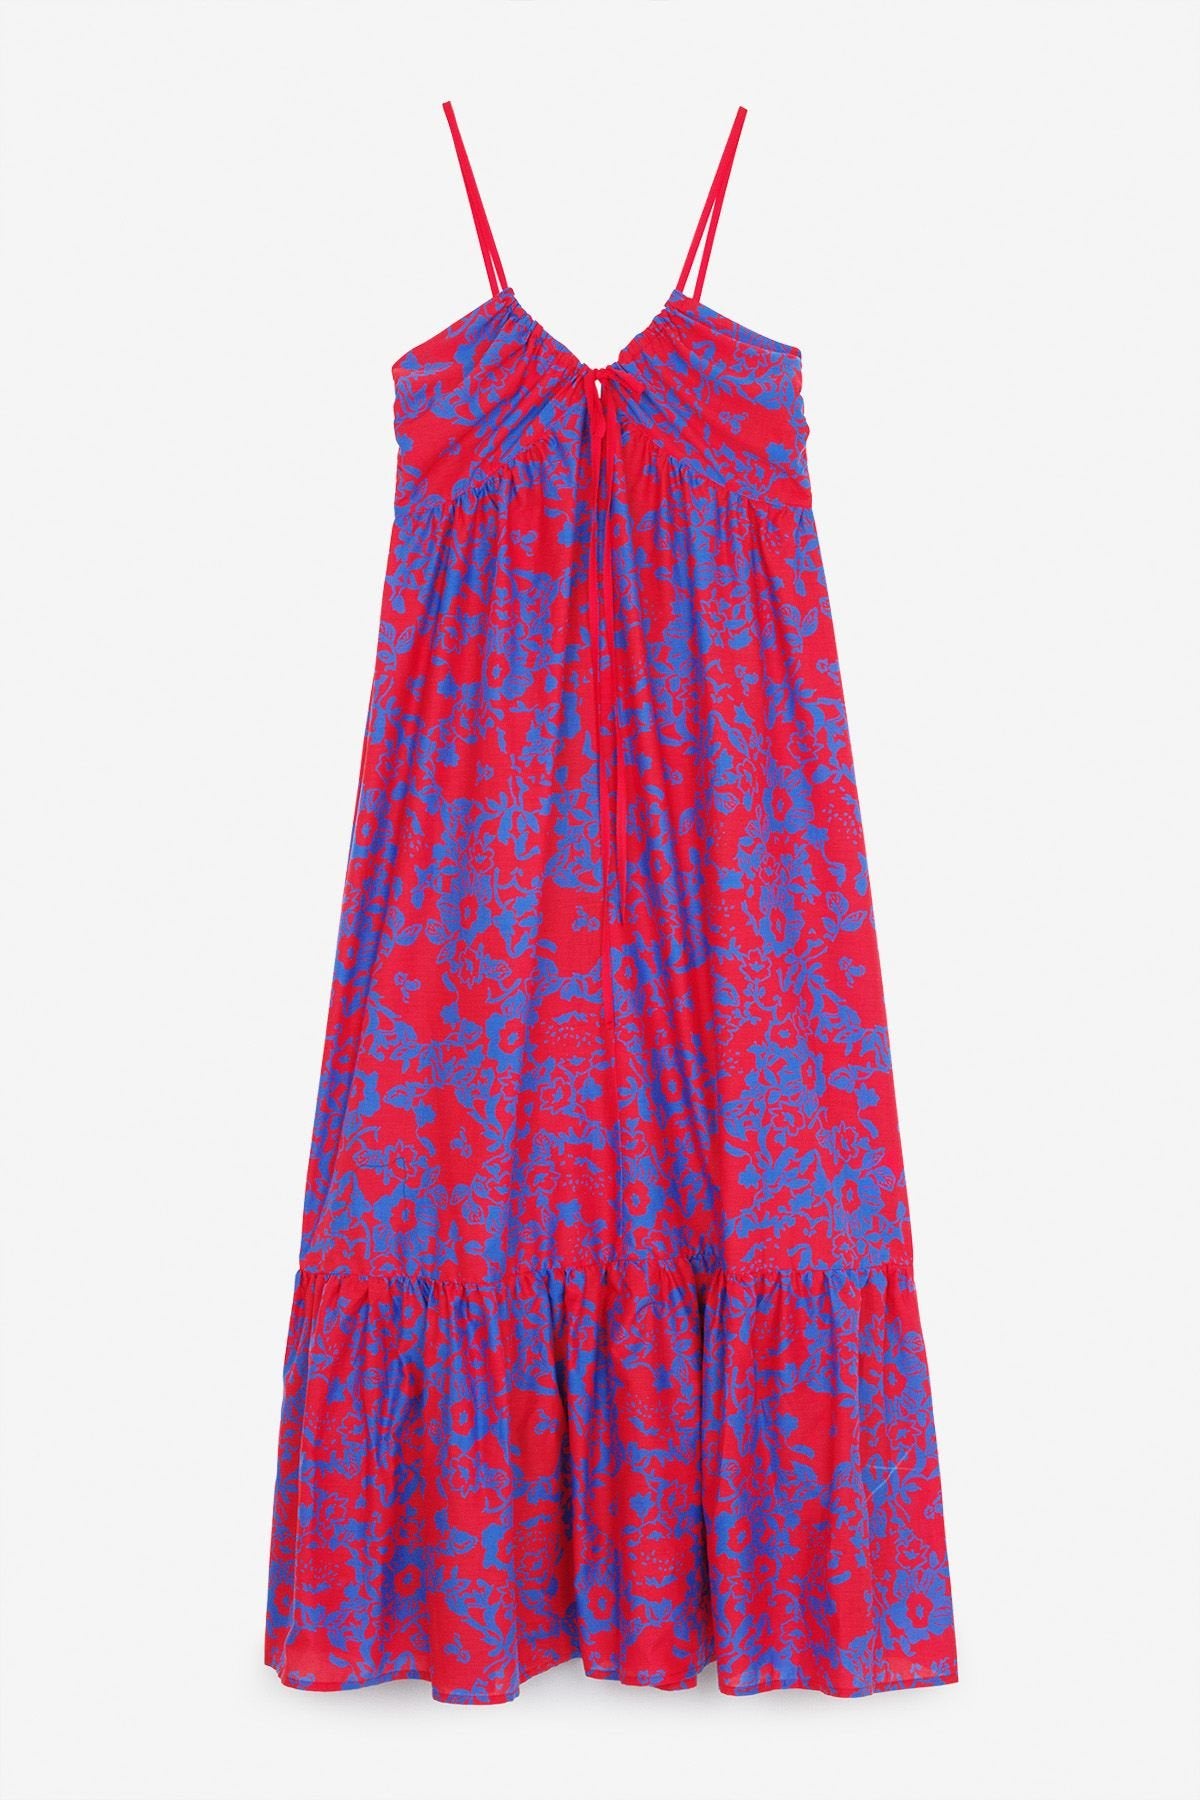 Ottod'ame - Florian Dress: Red and Blue